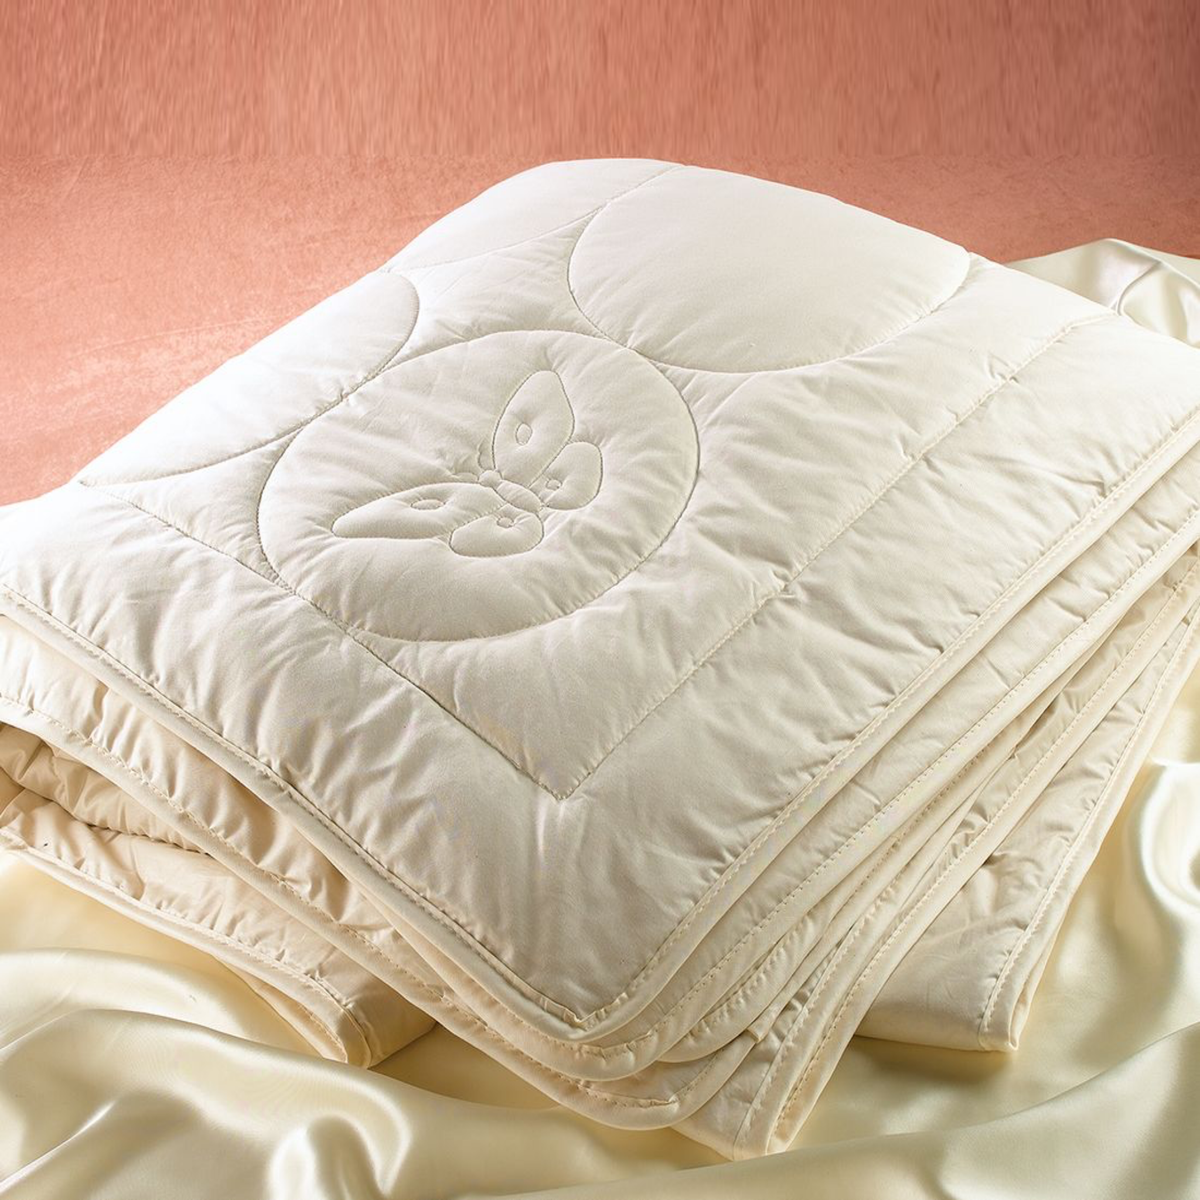 Folded Downtown Company Natural Silk Comforter